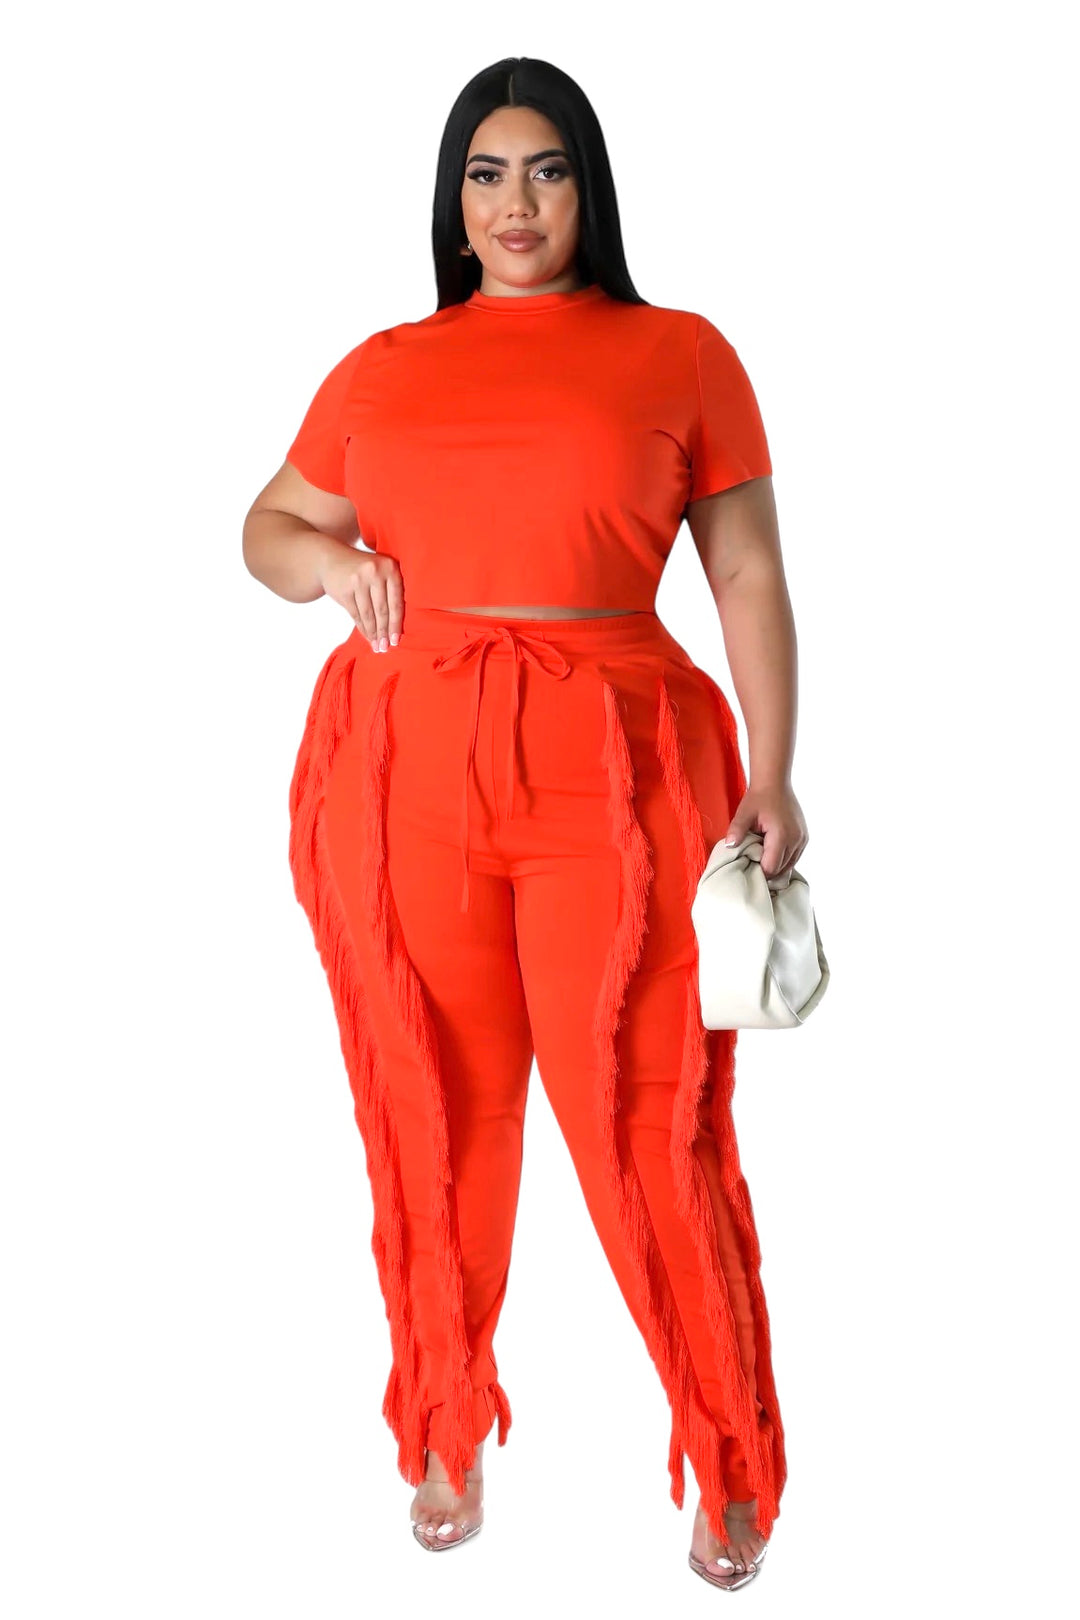 a woman in an orange top and pants